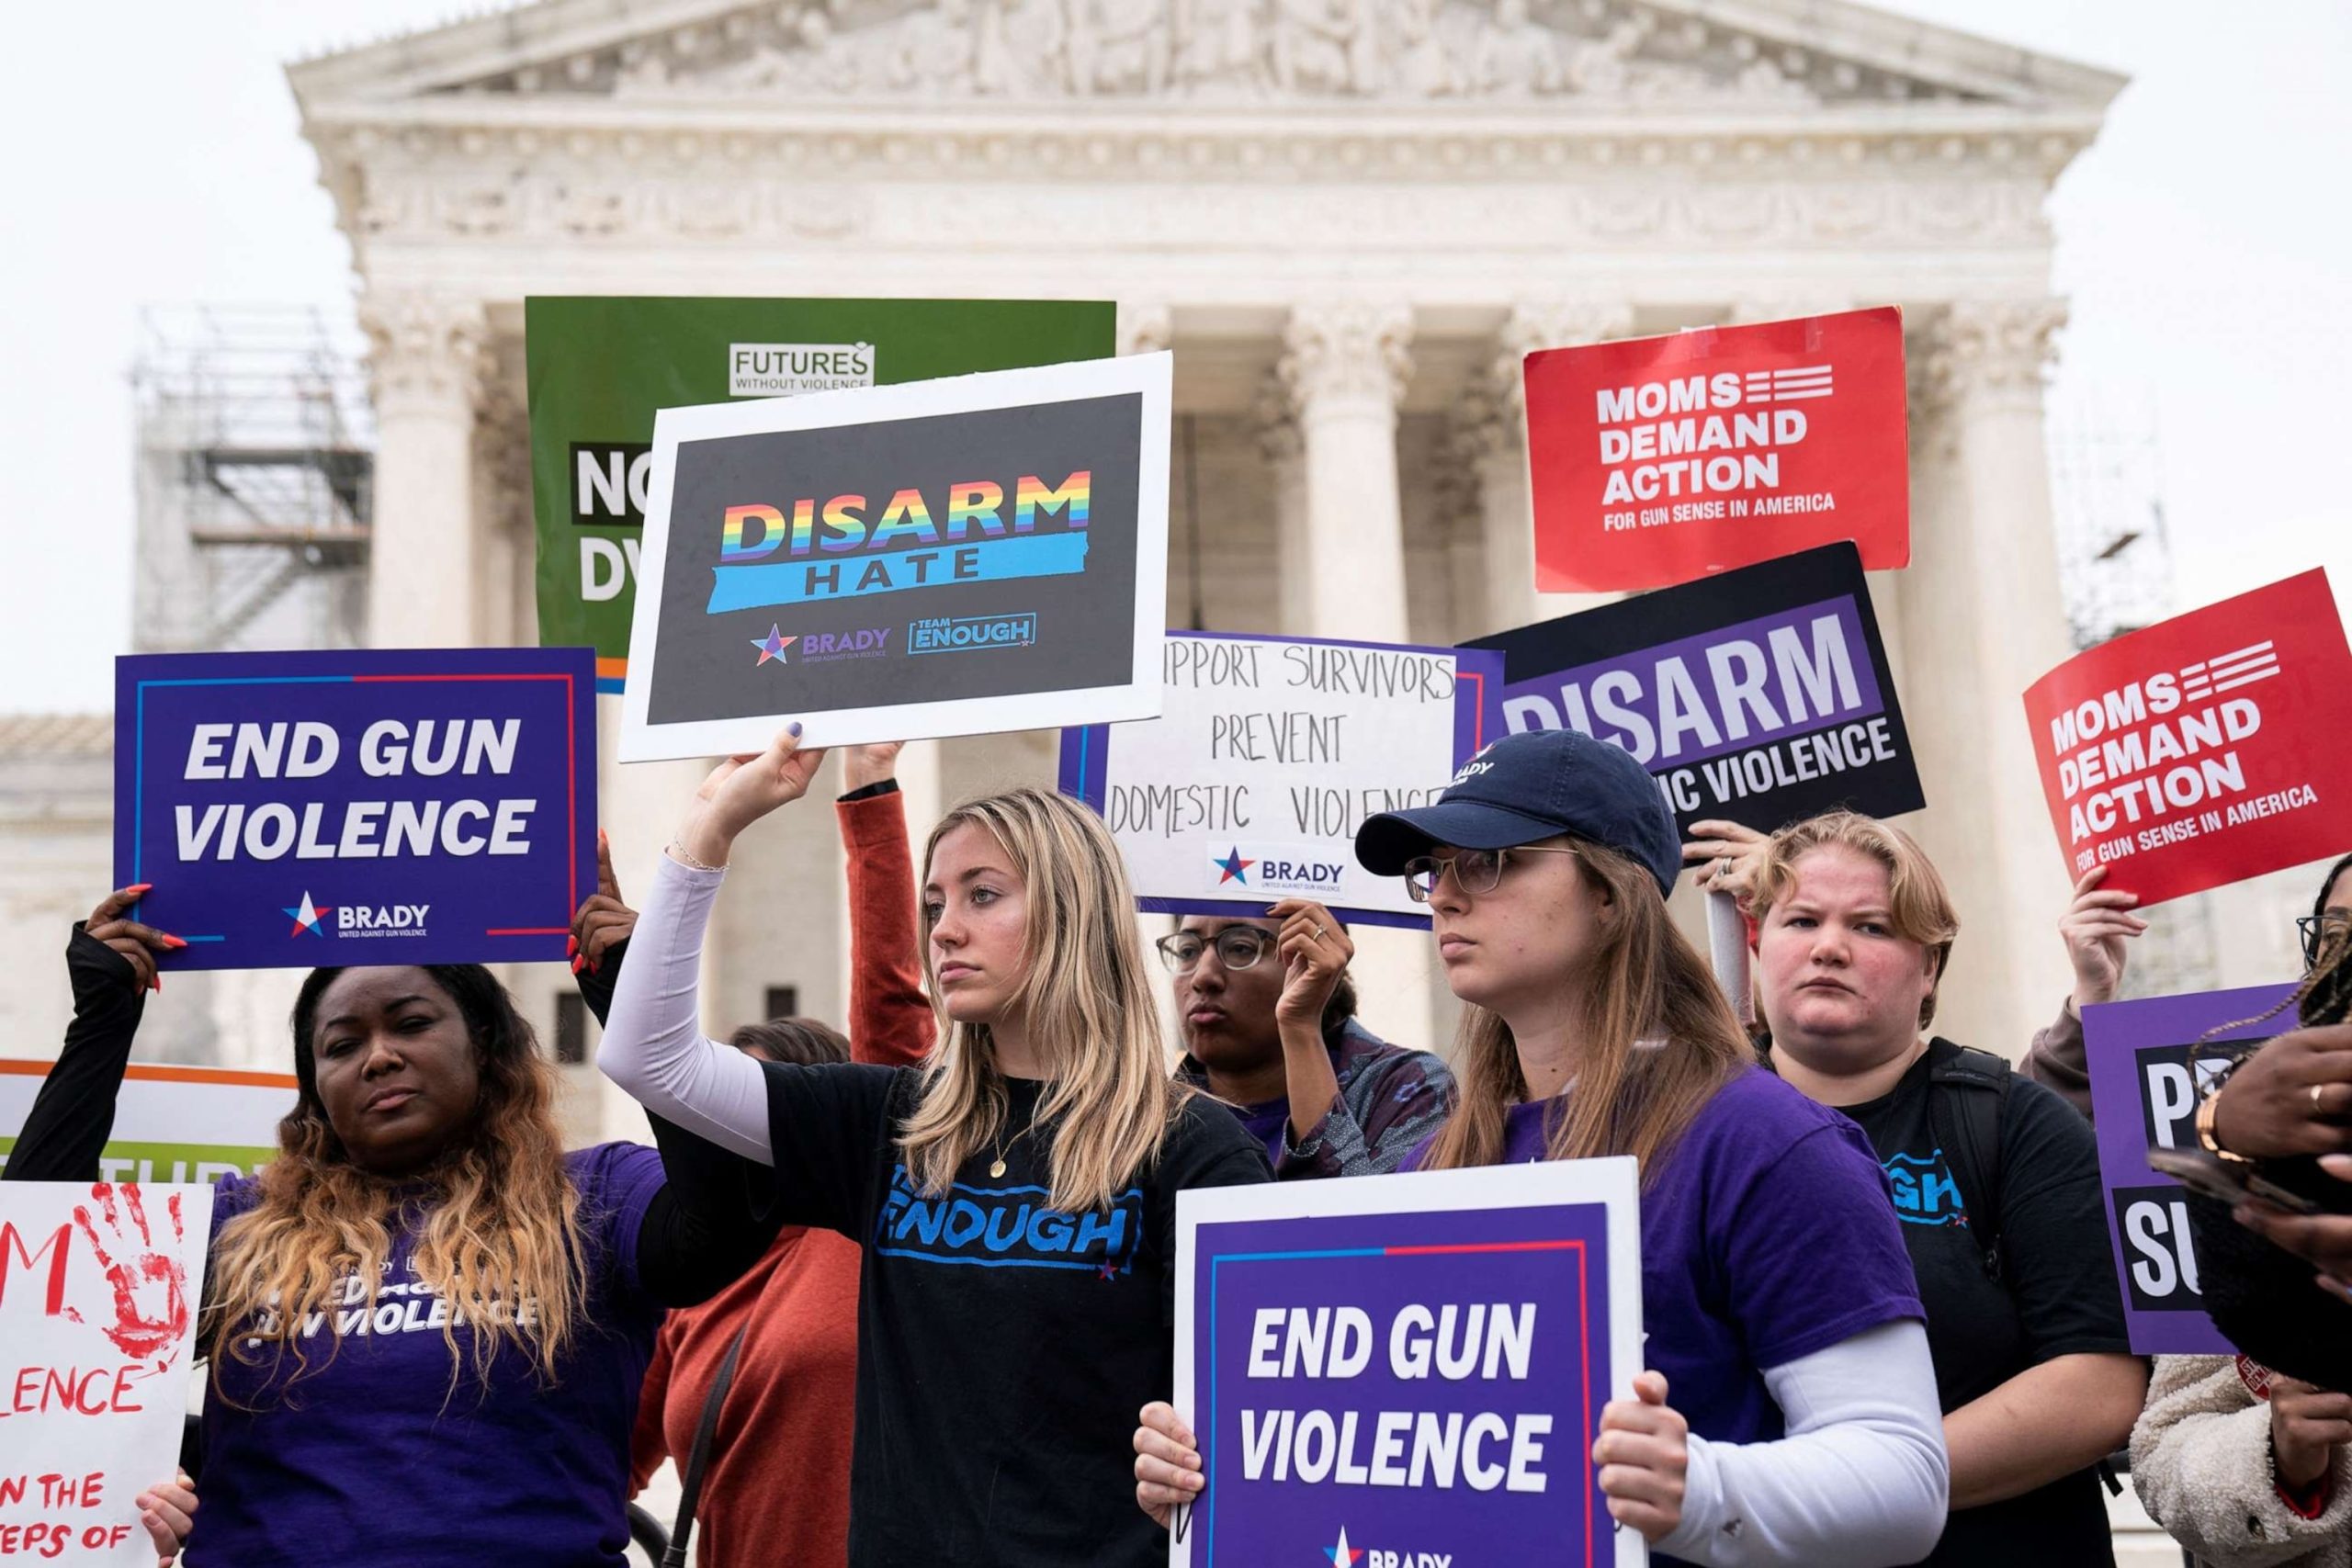 Potential Supreme Court Decision: Narrow Grounds Suggest Upholding Gun